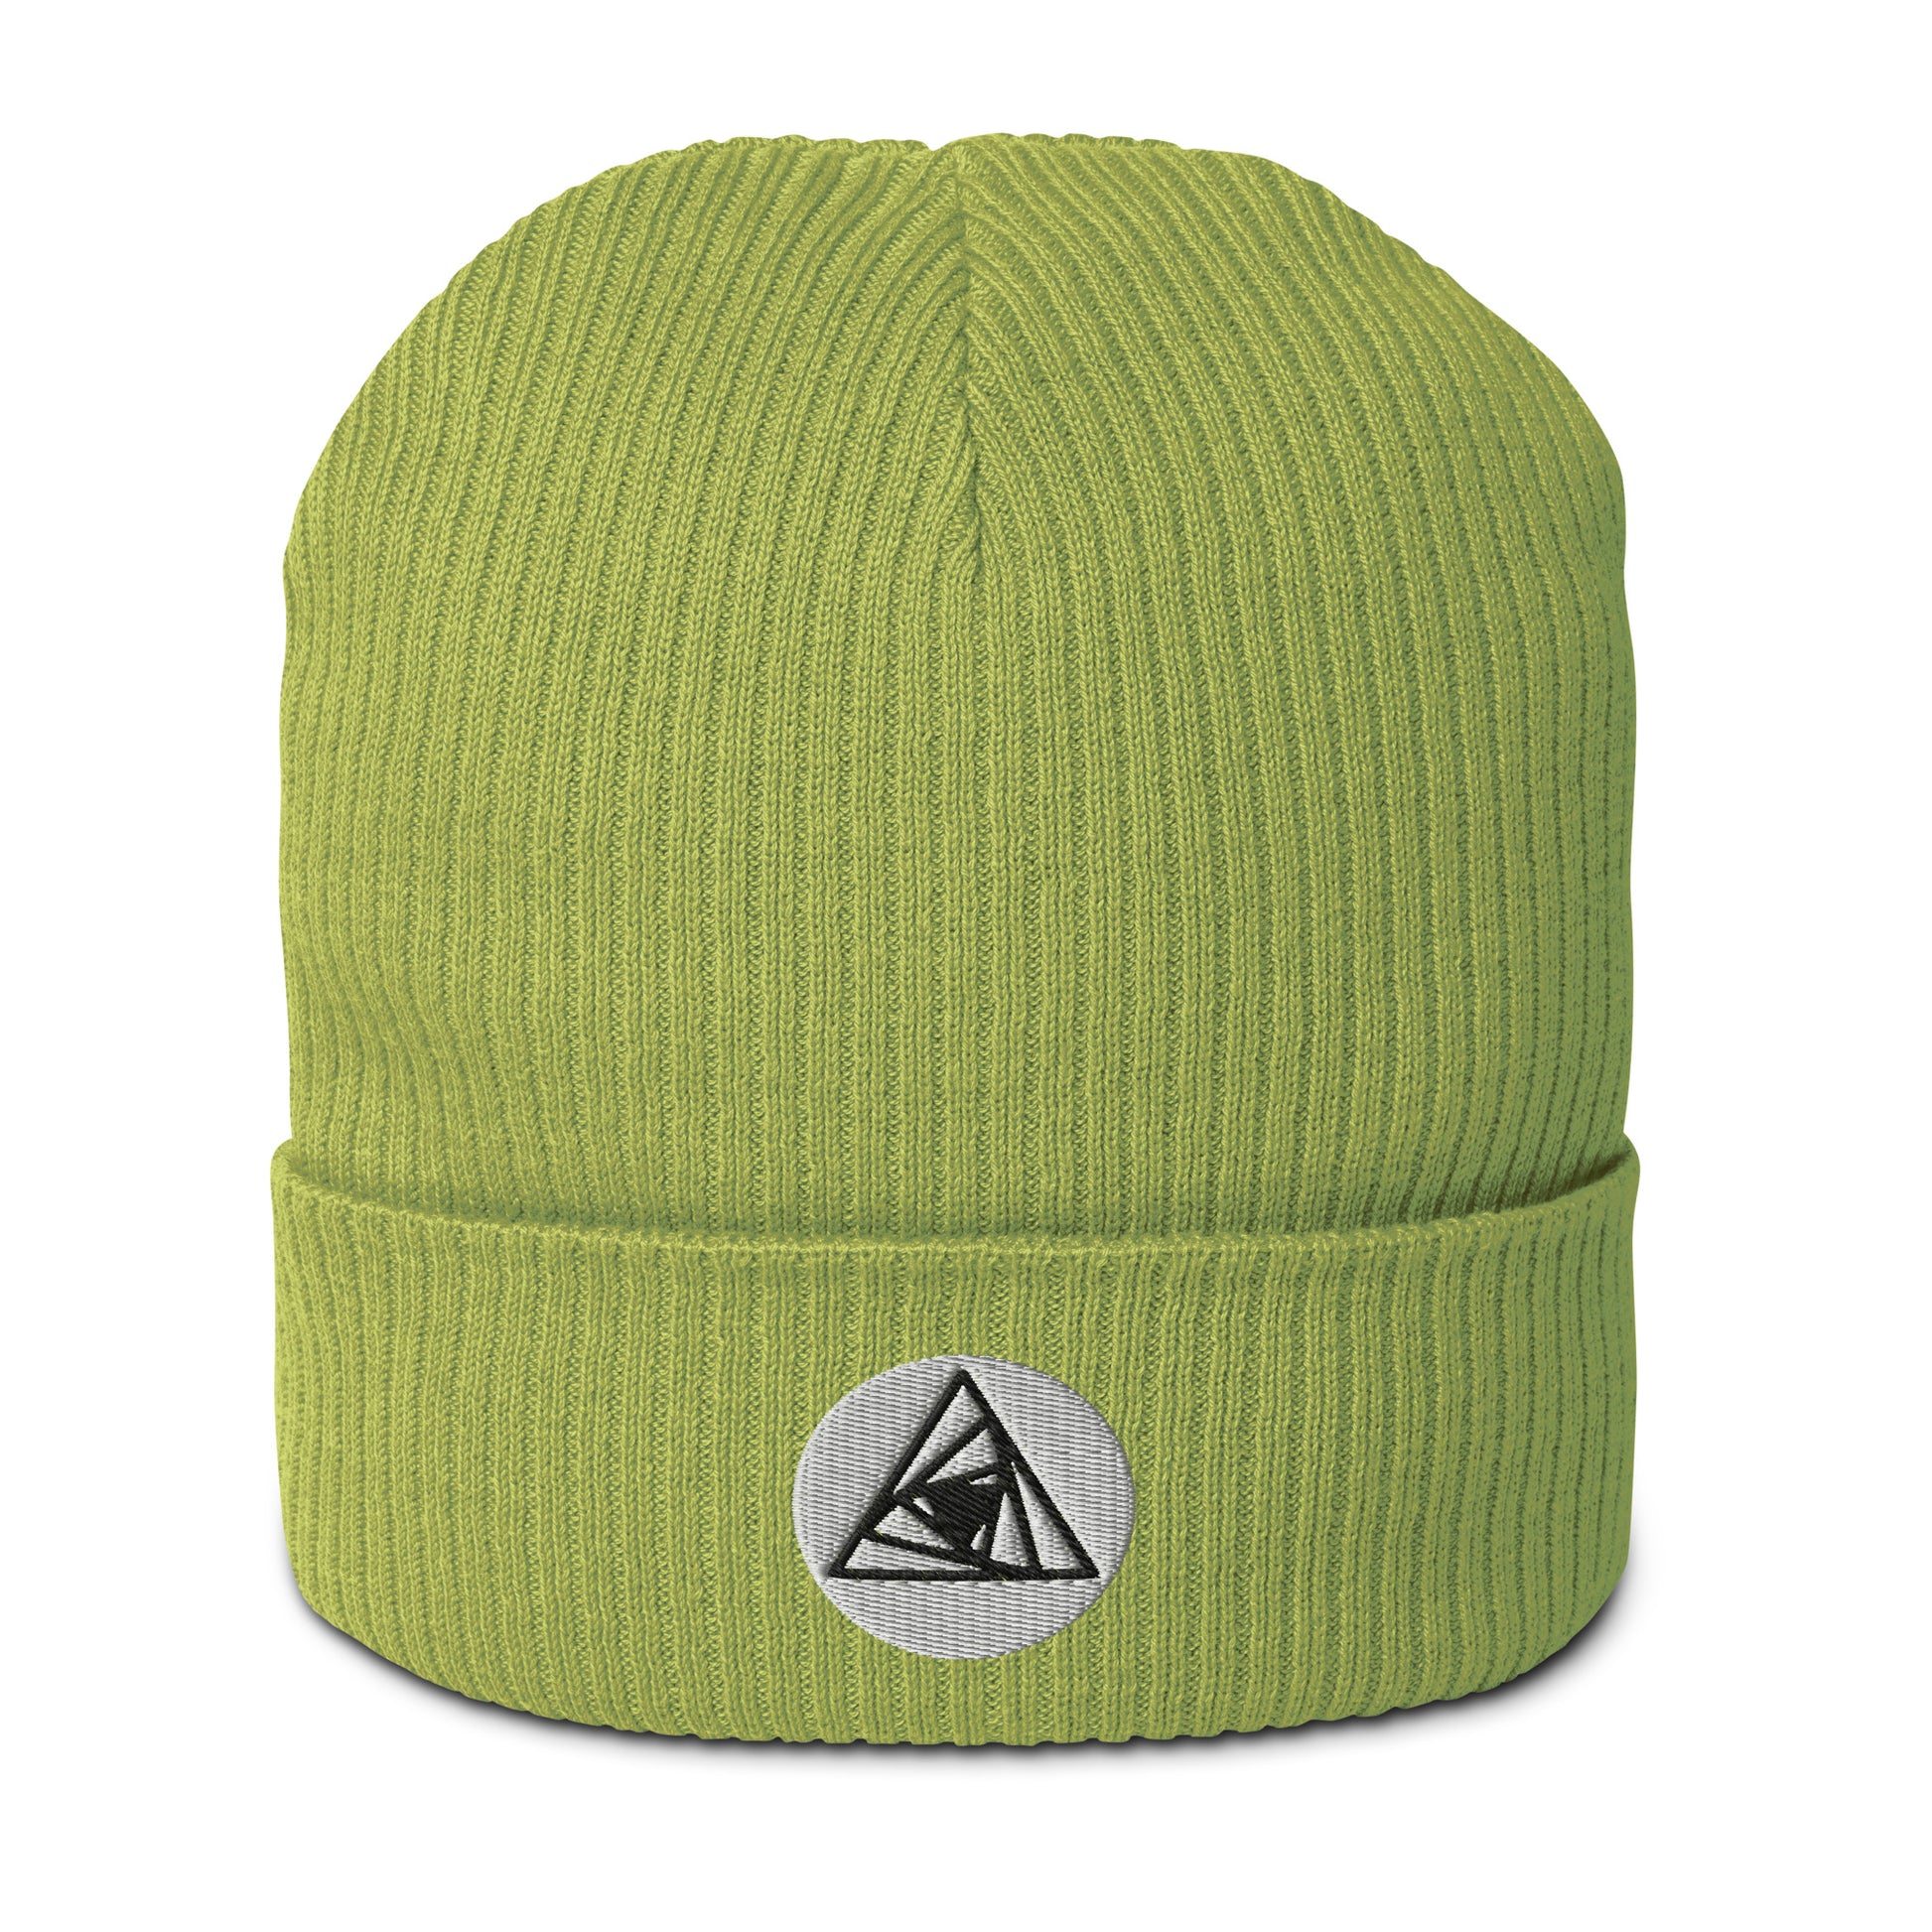 Behold, our Spiraling Equilateral Triangles Beanie in Apple Green  -  a  garment of cosmic significance. Crafted from organic cotton and adorned with a mesmerizing Spiraling Equilateral Triangles embroidery, it's not your run-of-the-mill hat. 